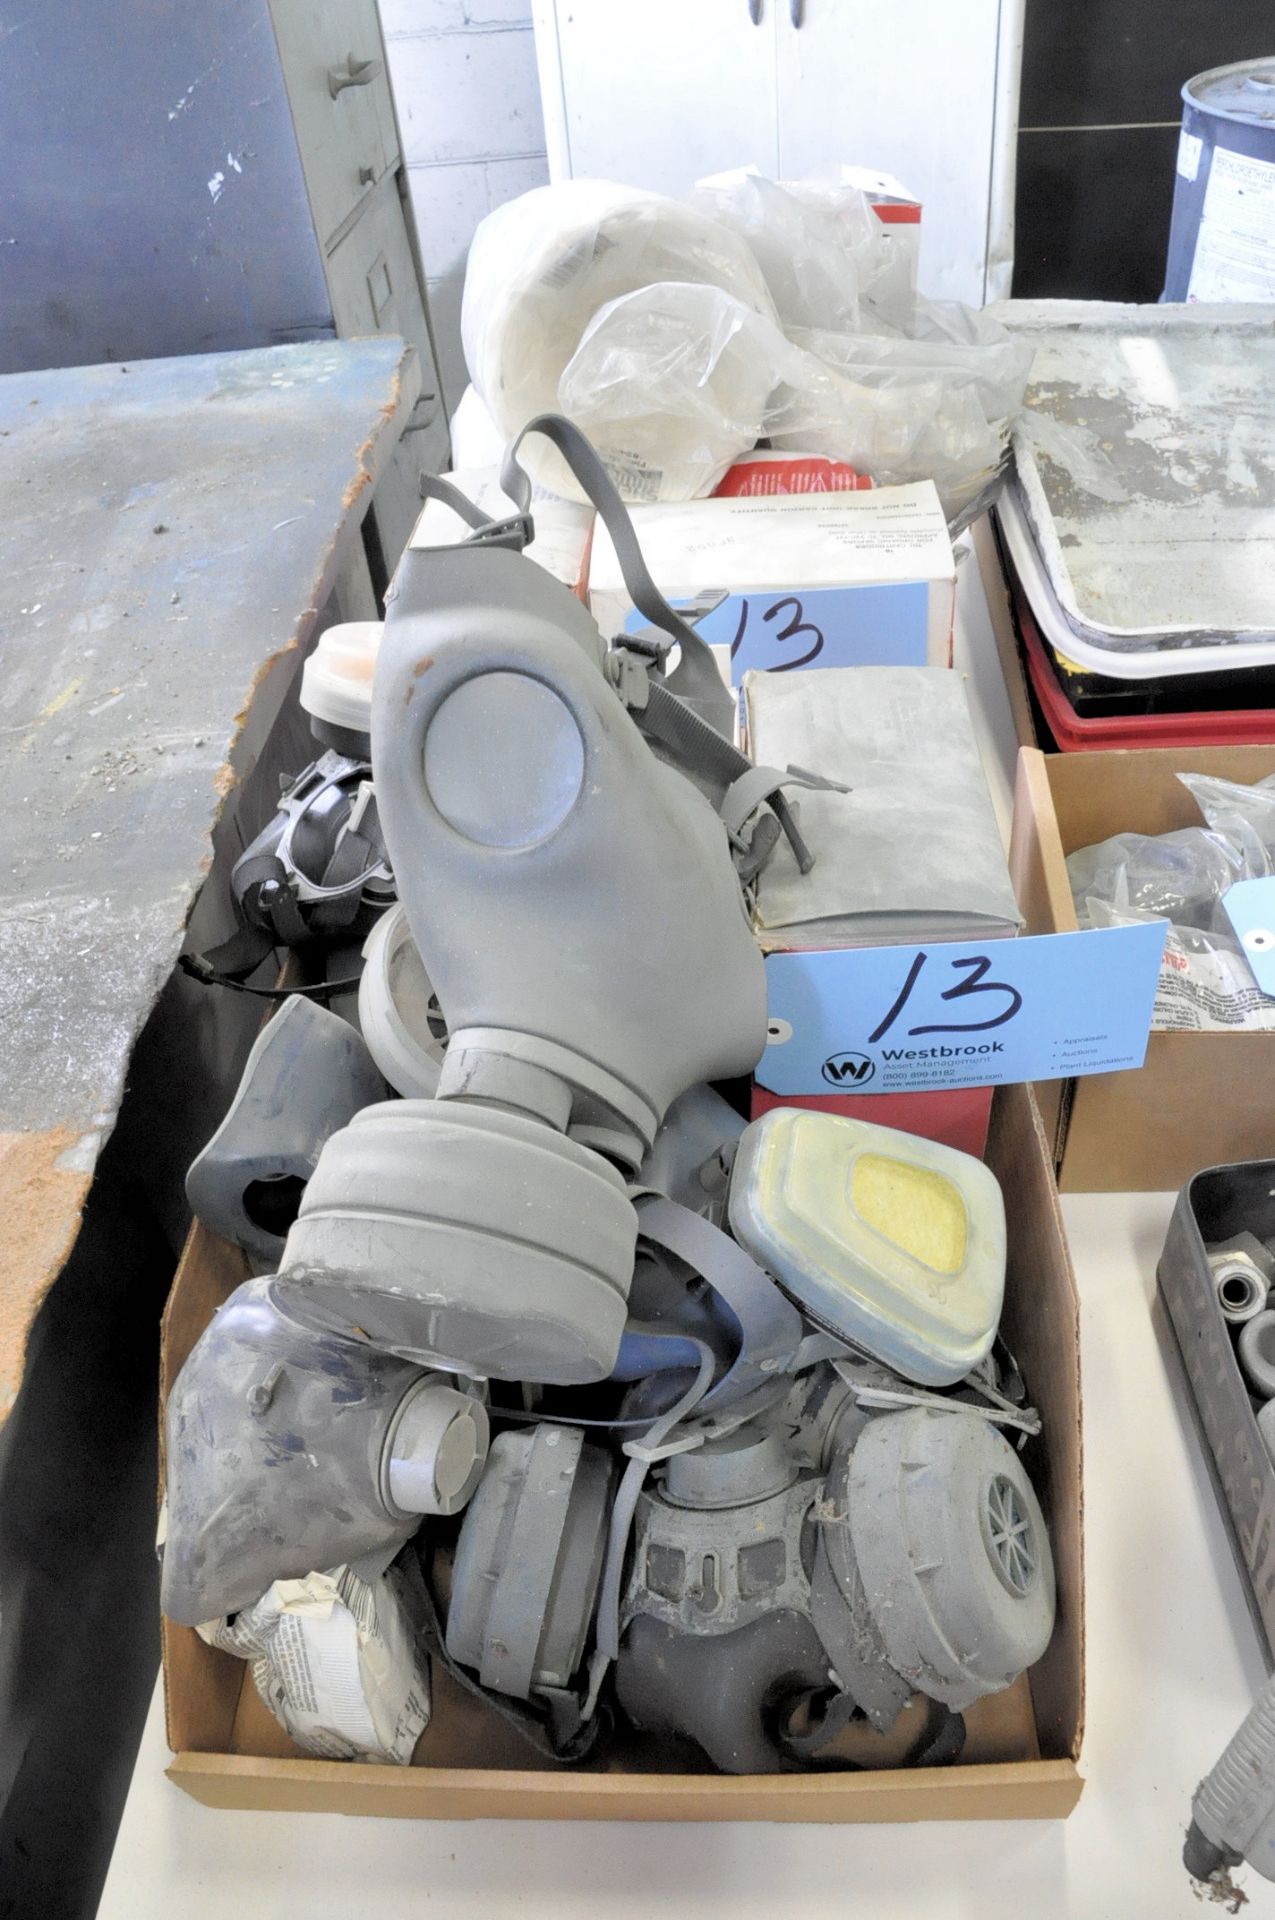 Lot-Vinyl Gloves, Respirators, Paint Strainers, Etc. in (4) Boxes - Image 2 of 4